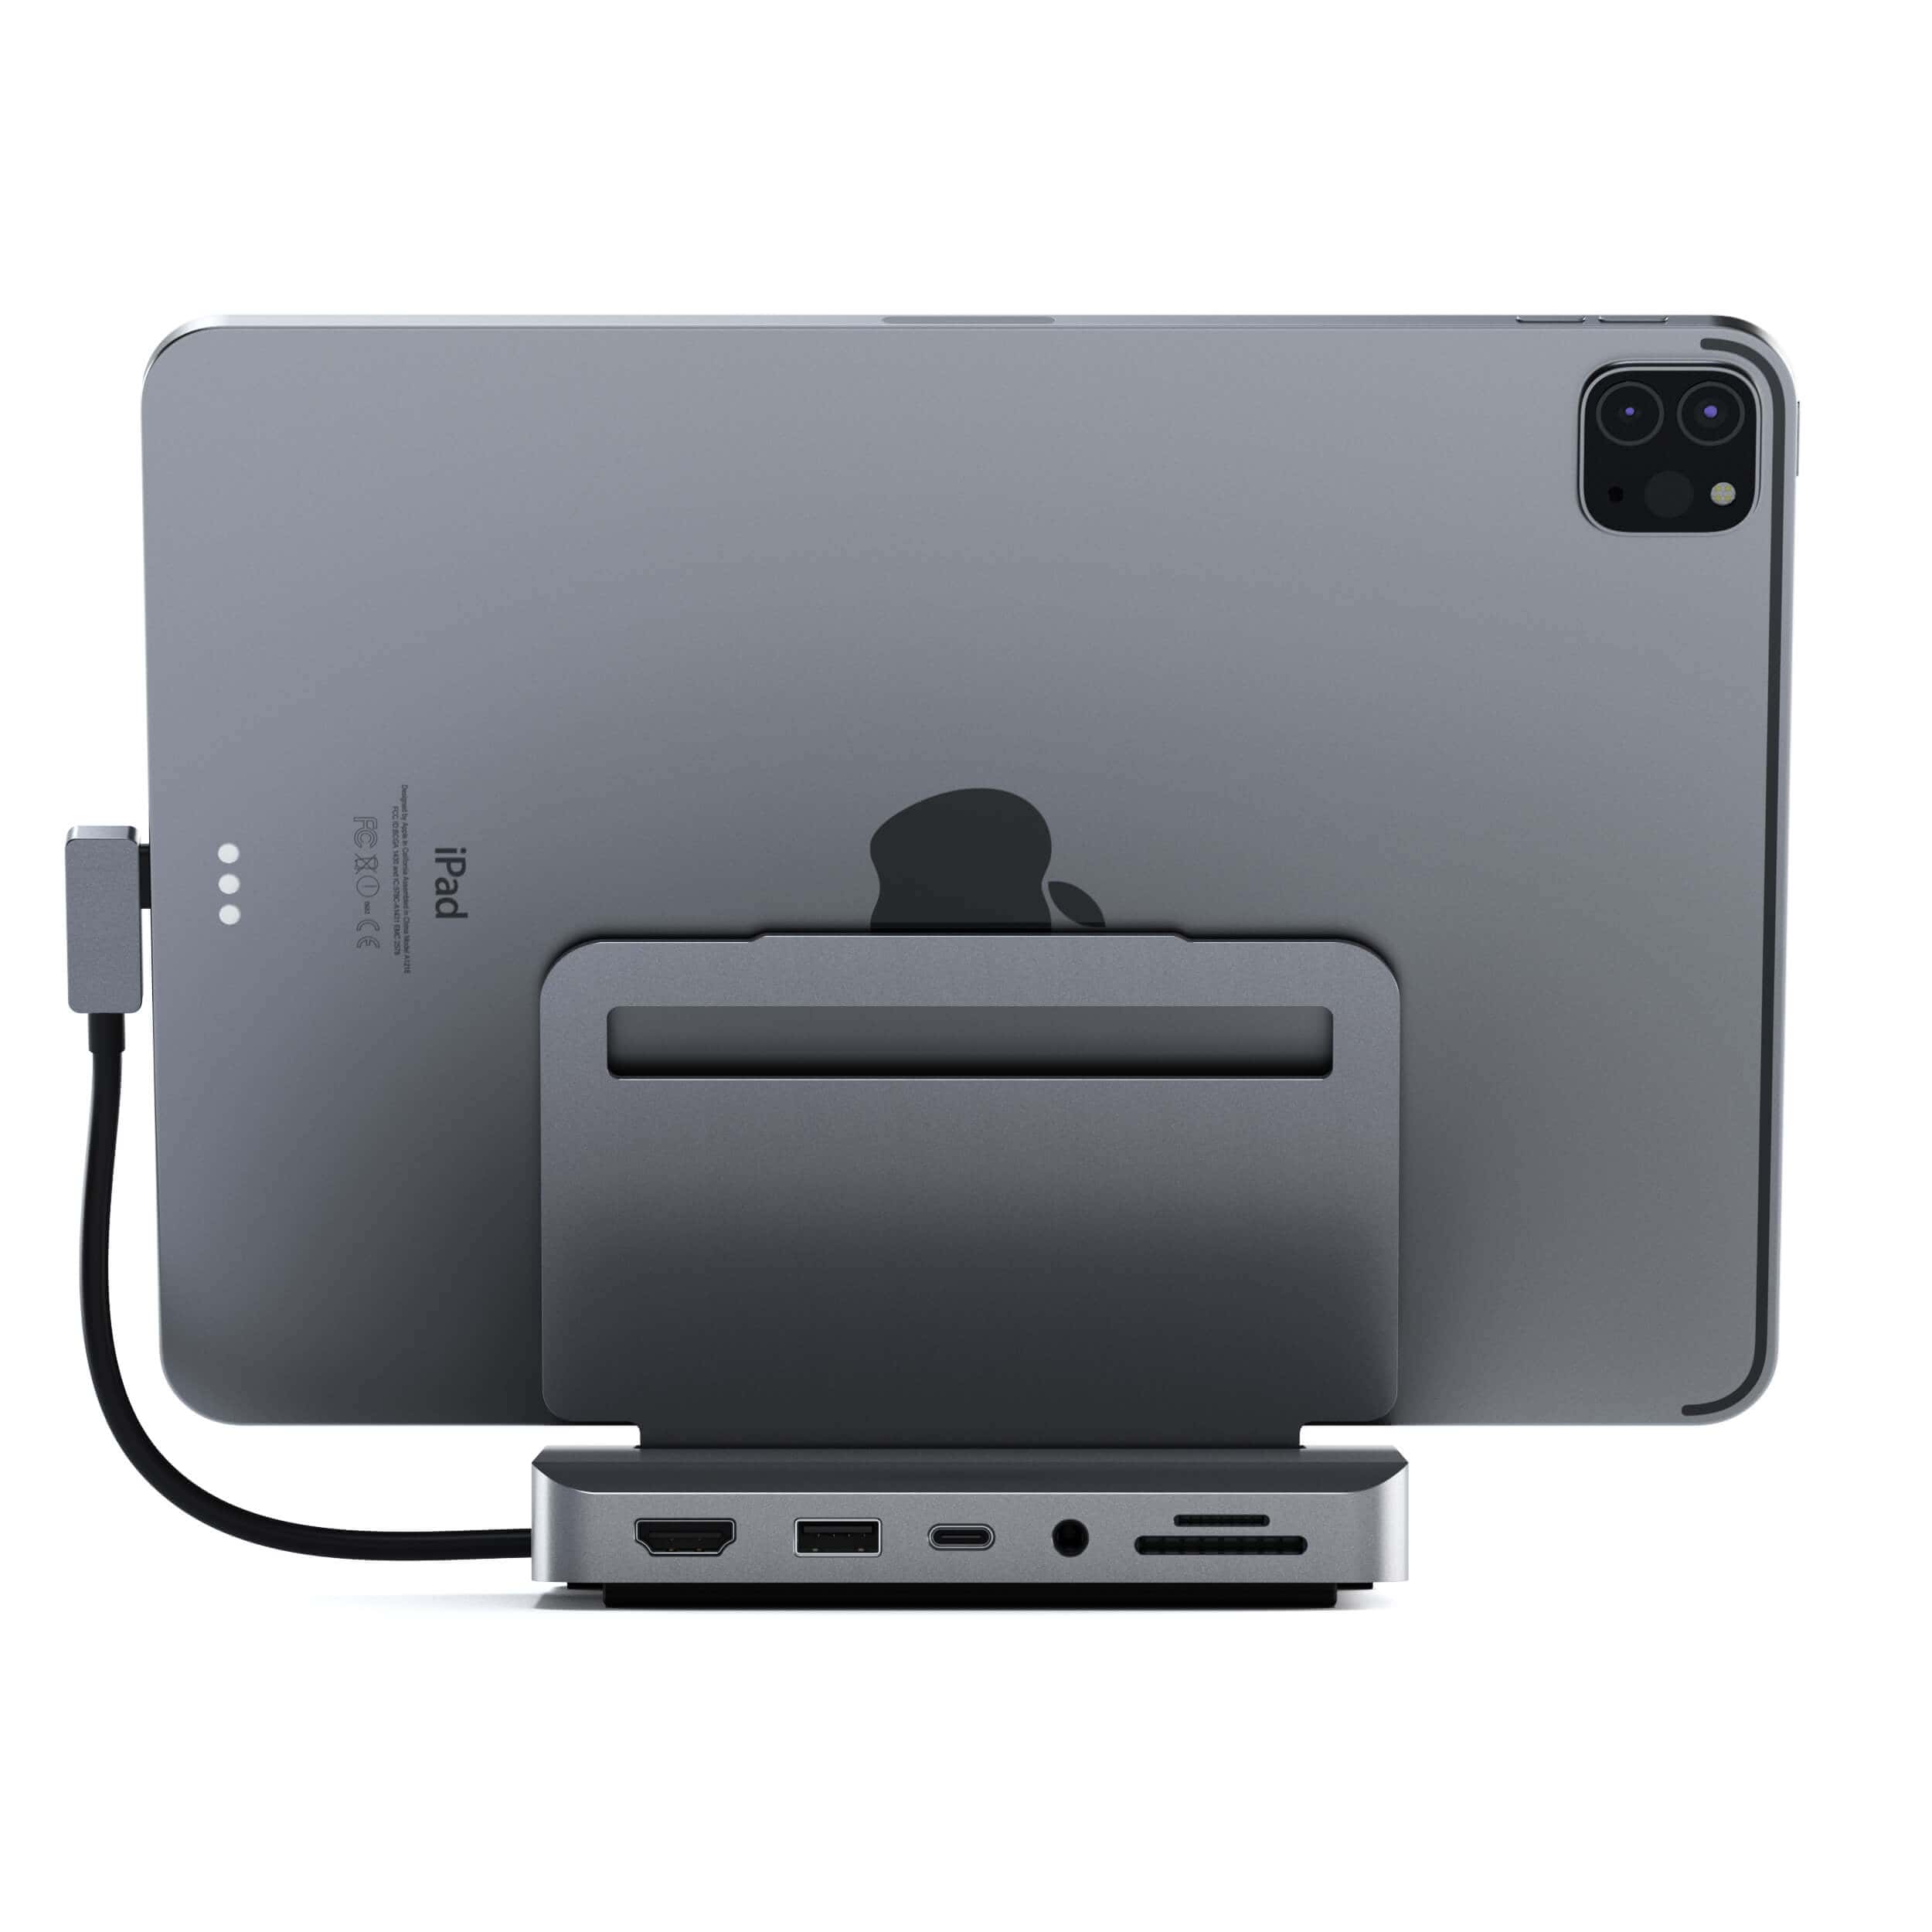 Satechi Aluminum Stand Hub for iPad Pro space gray_06